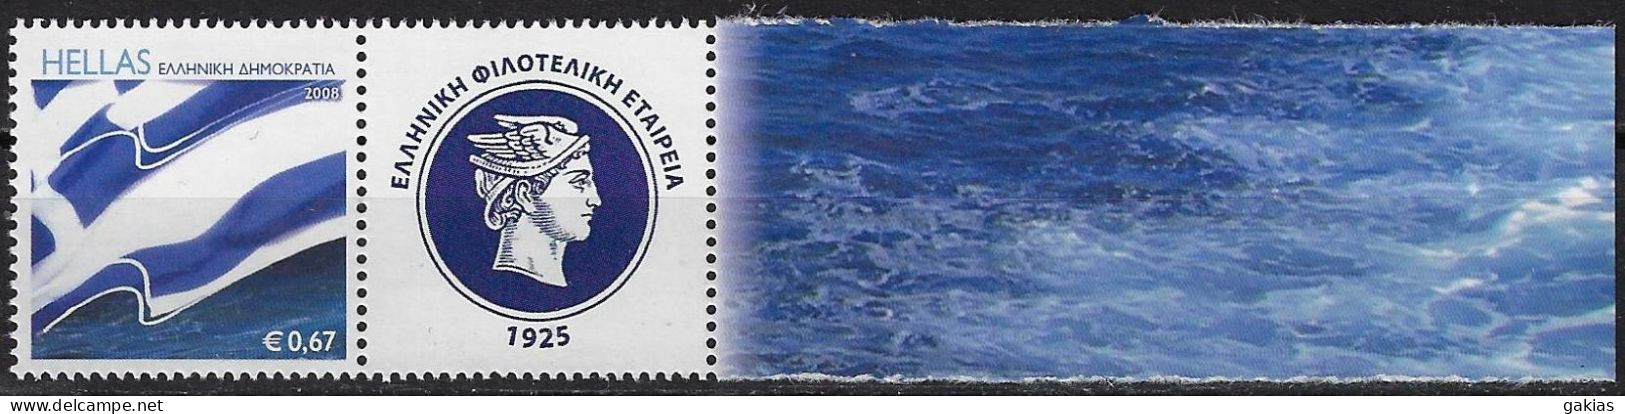 GREECE 2021, 2 Uprated Personalised Stamps, 1 With WORLD POST DAY Label And 1 With Label, MNH/**, RRR!!! - Nuevos